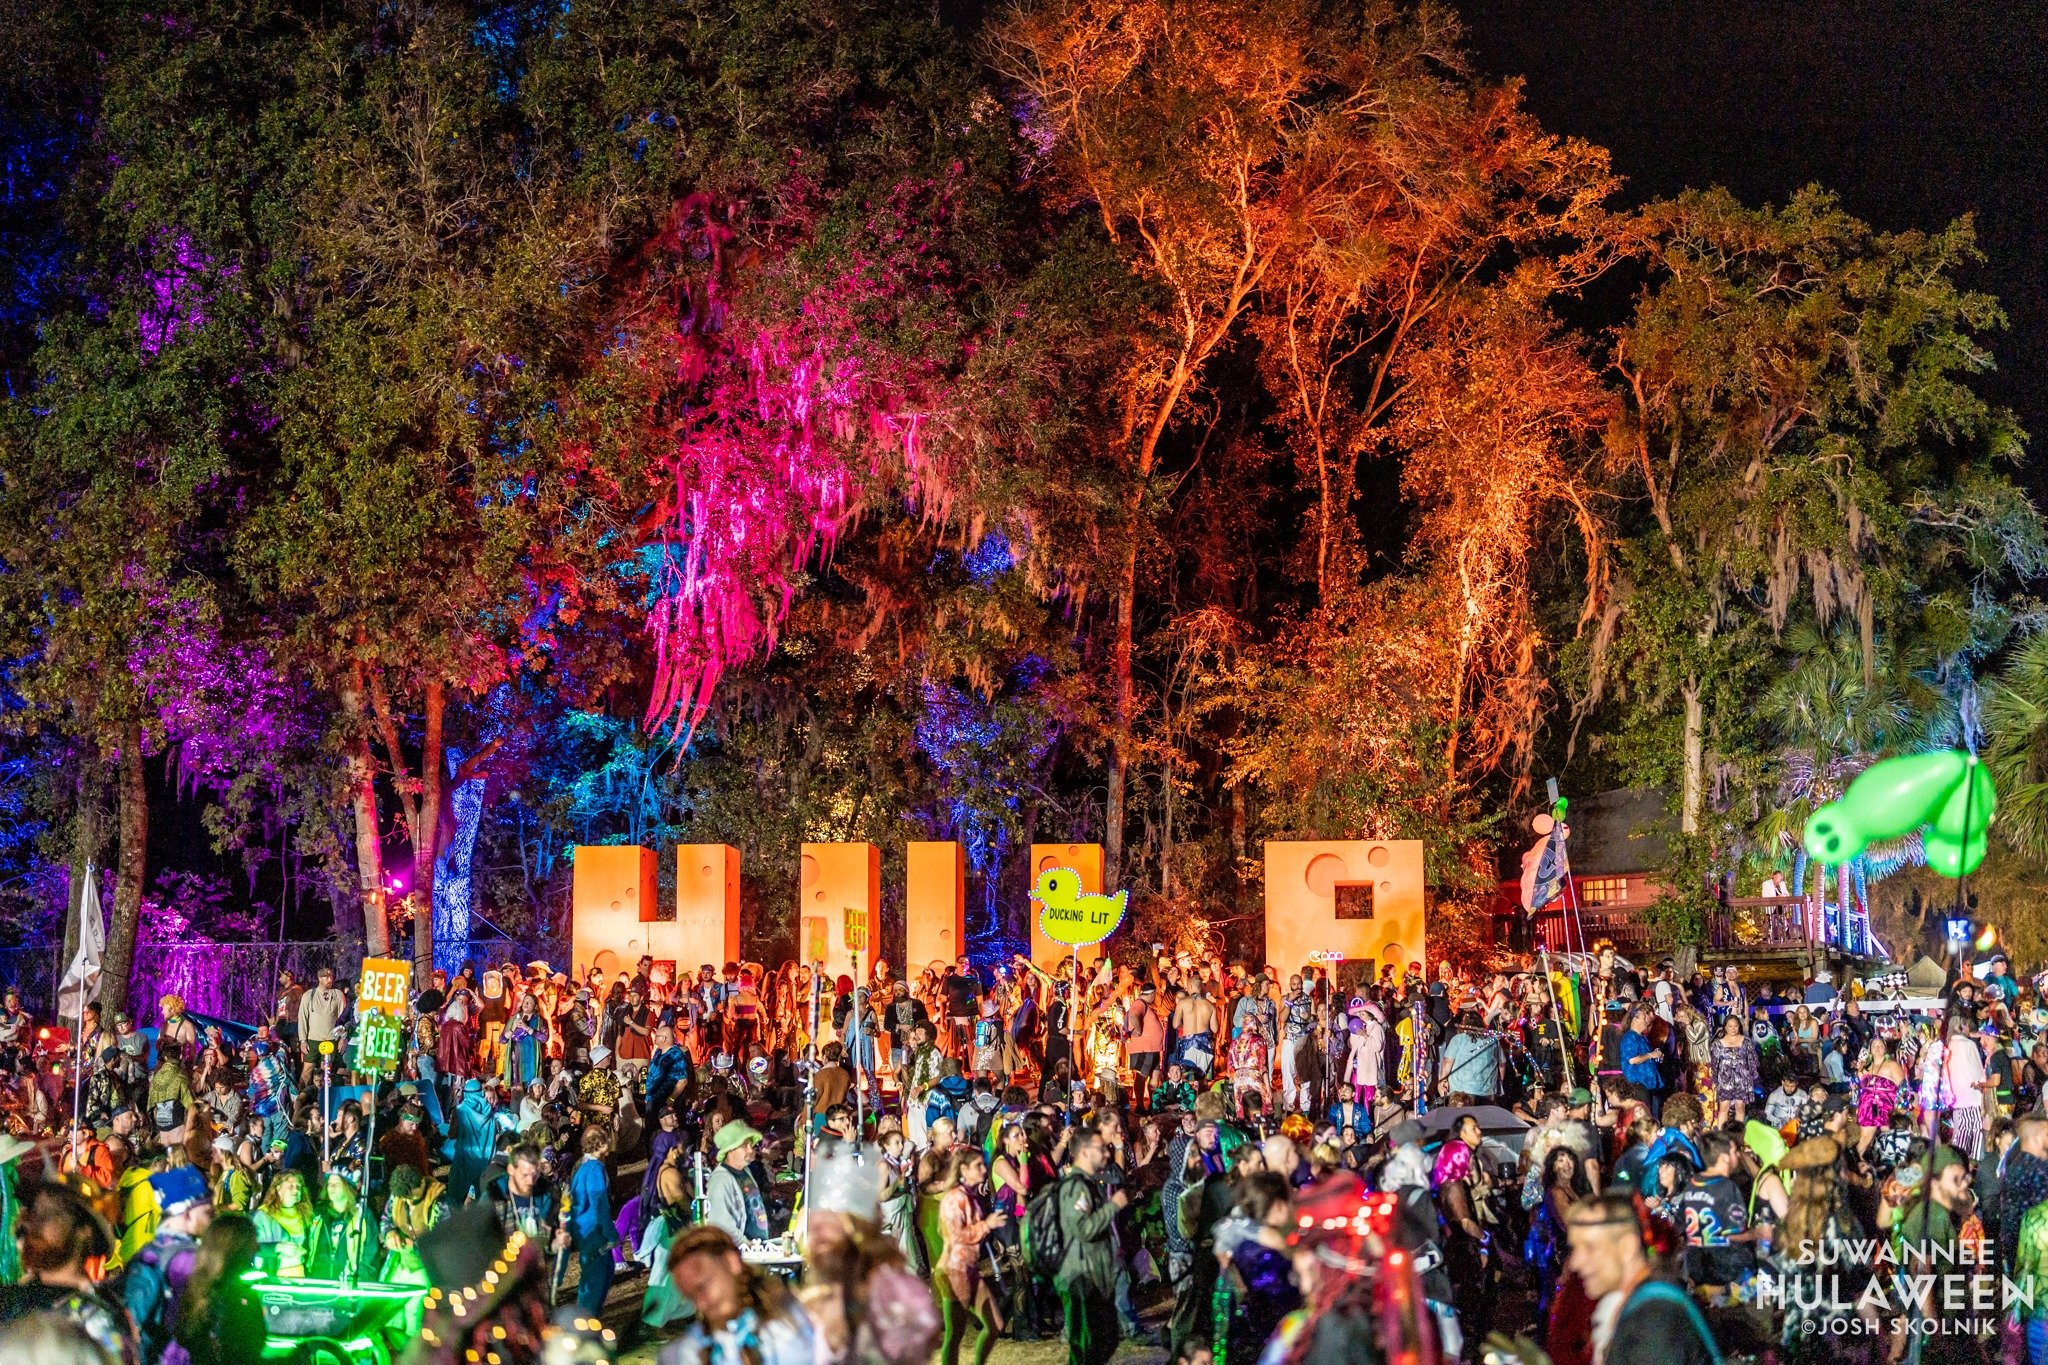 10 Artists That Will Blow Your Mind at Suwannee Hulaween 2023